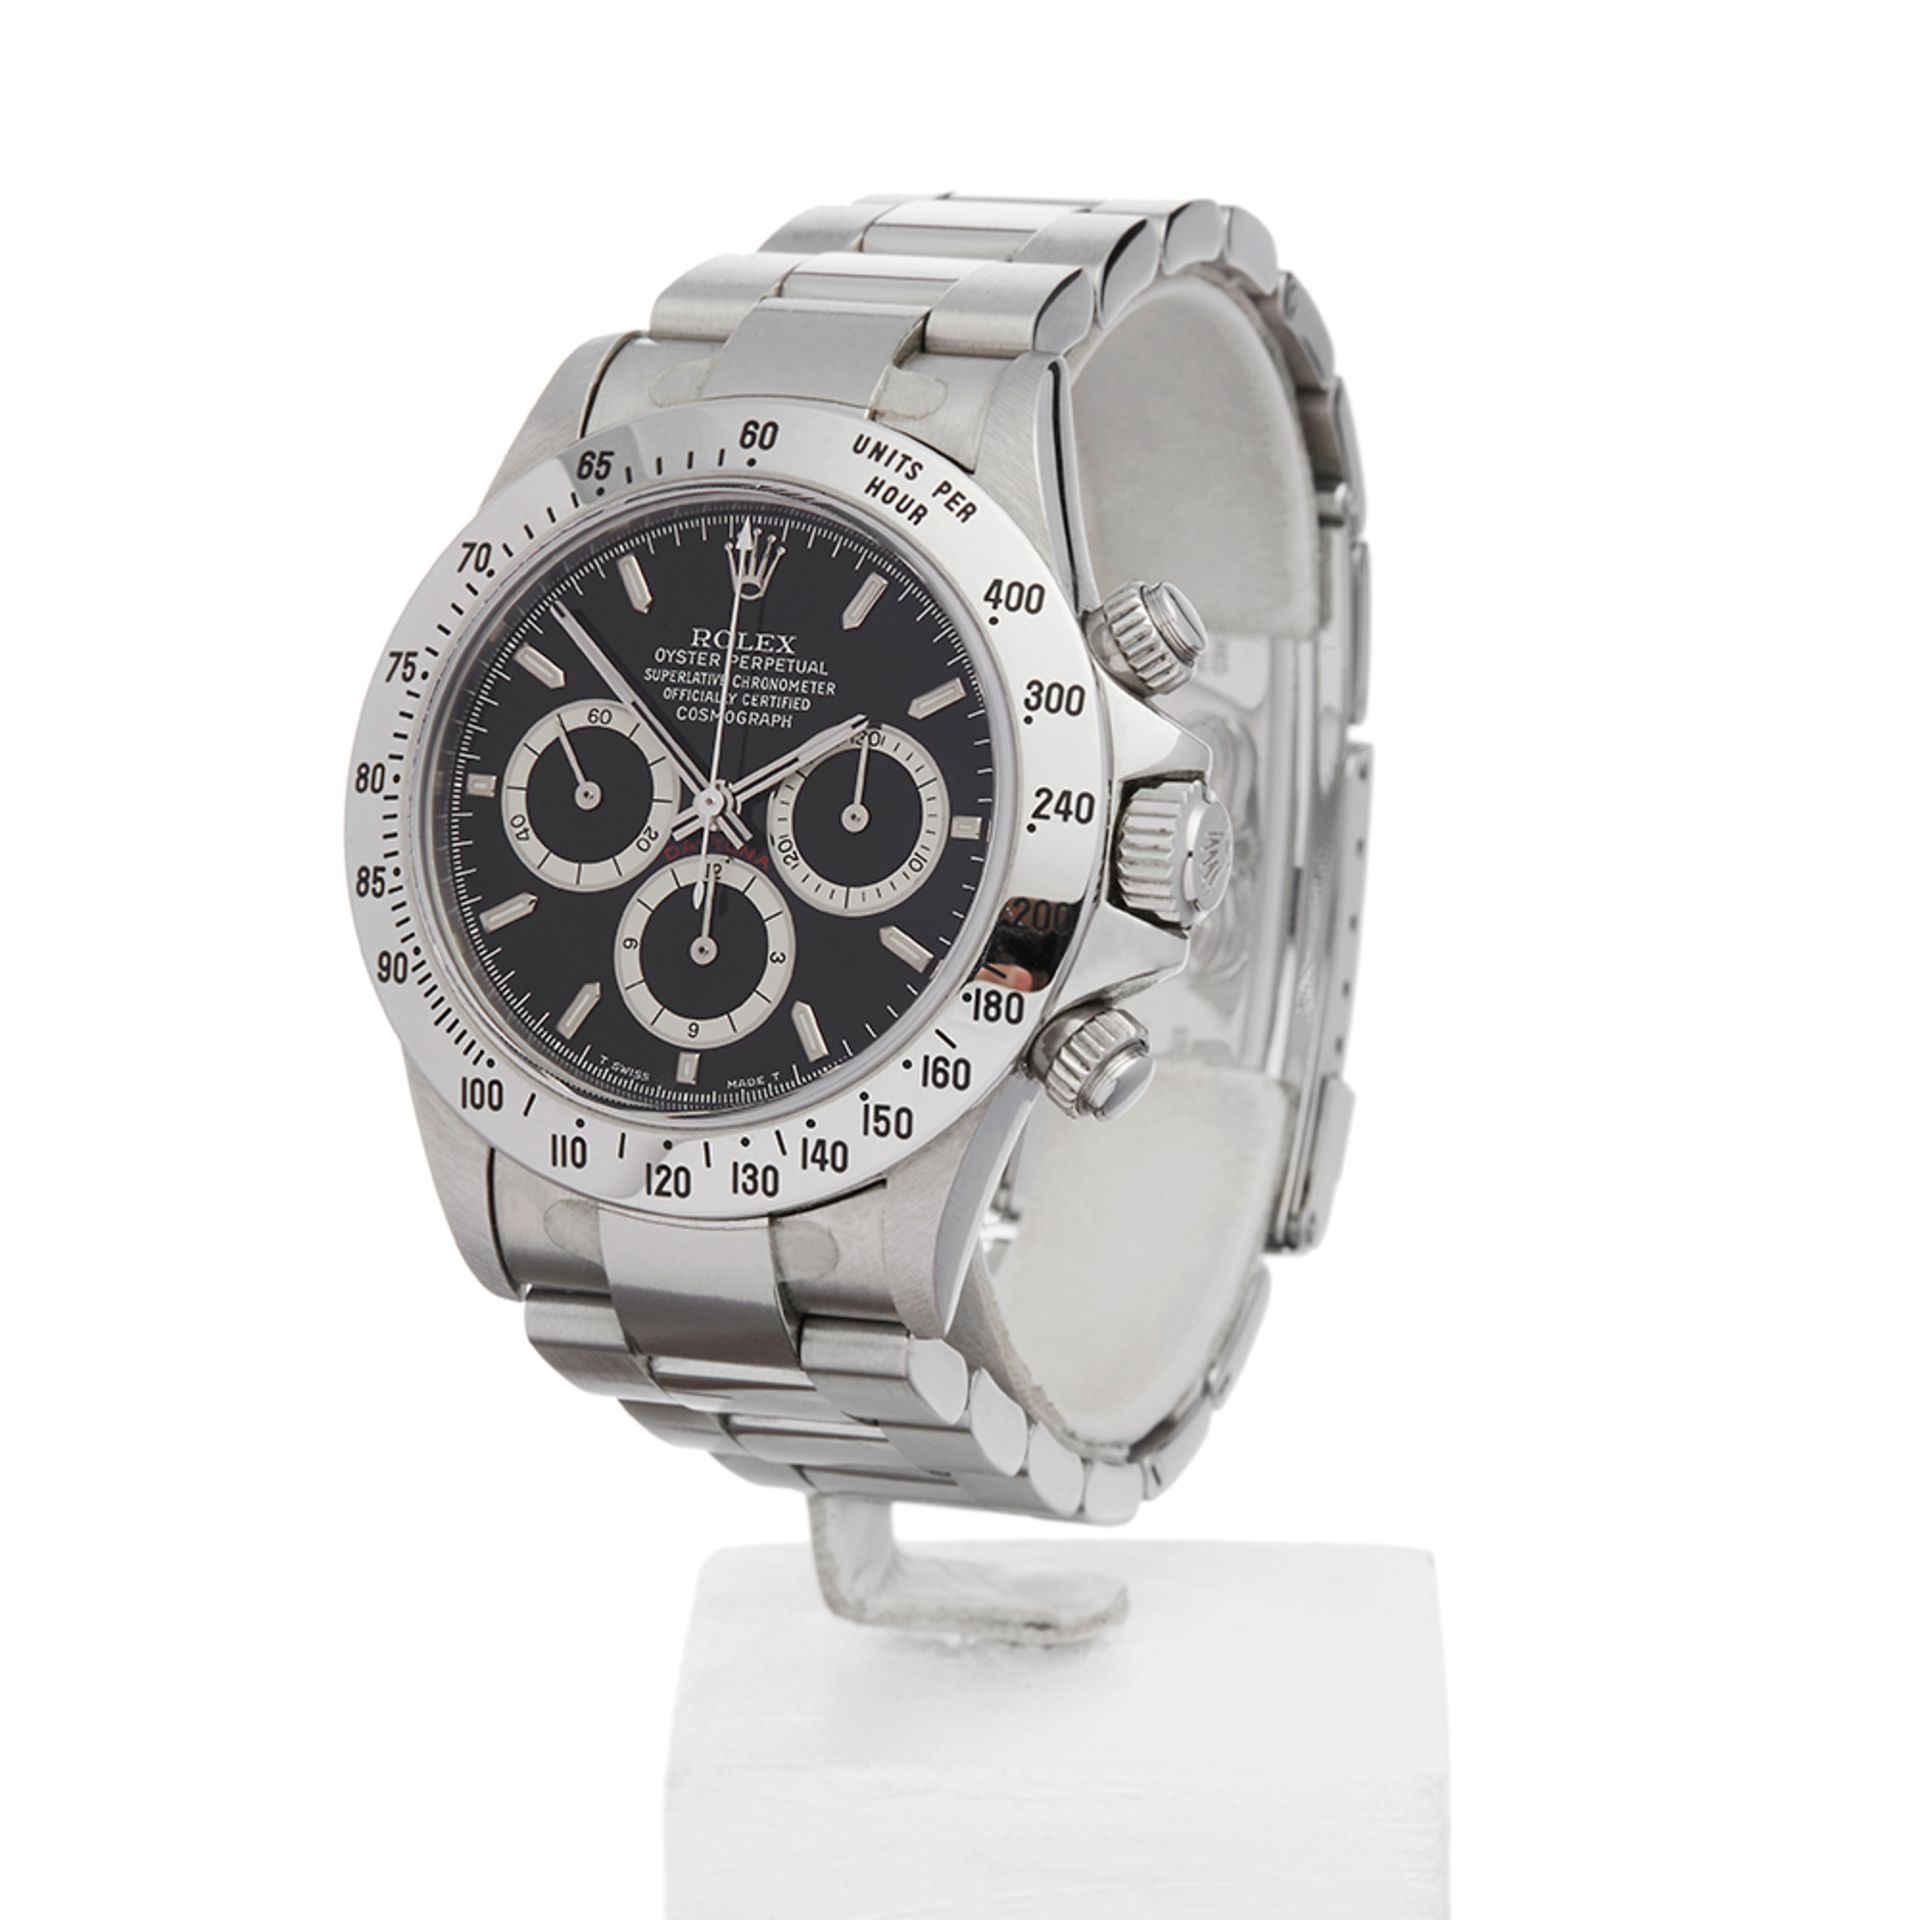 Rolex Daytona Zenith Chronograph Inverted 6 40mm Stainless Steel - 16520 - Image 3 of 8